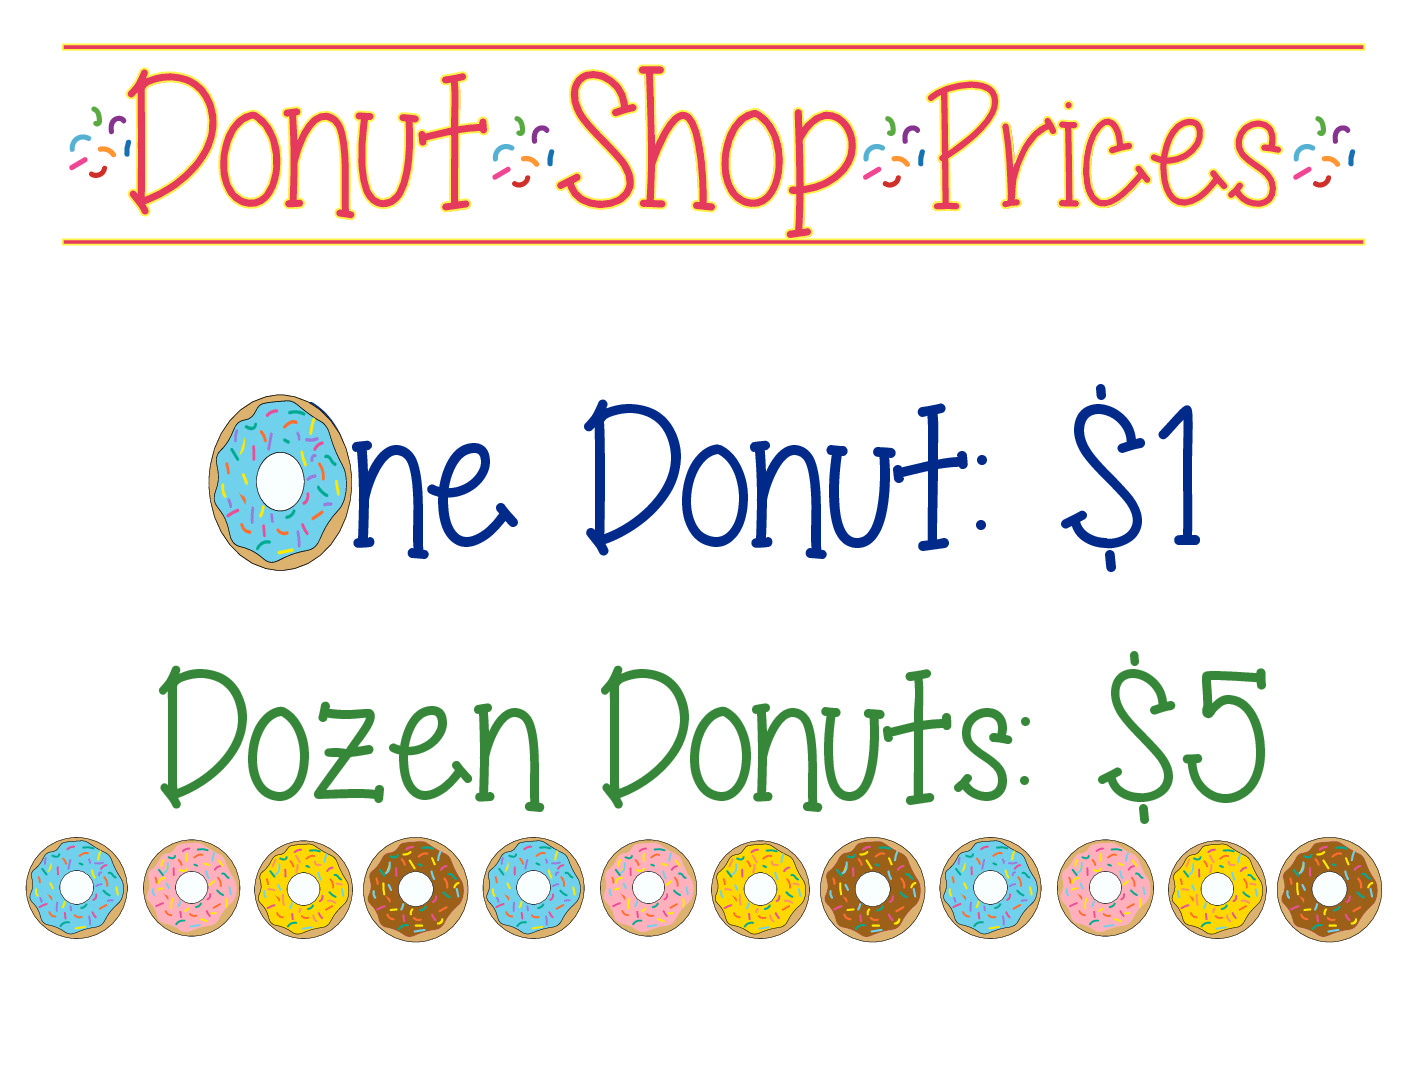 Preschool Dramatic Play Donut Shop Prices Sign by Mandy's Party Printables